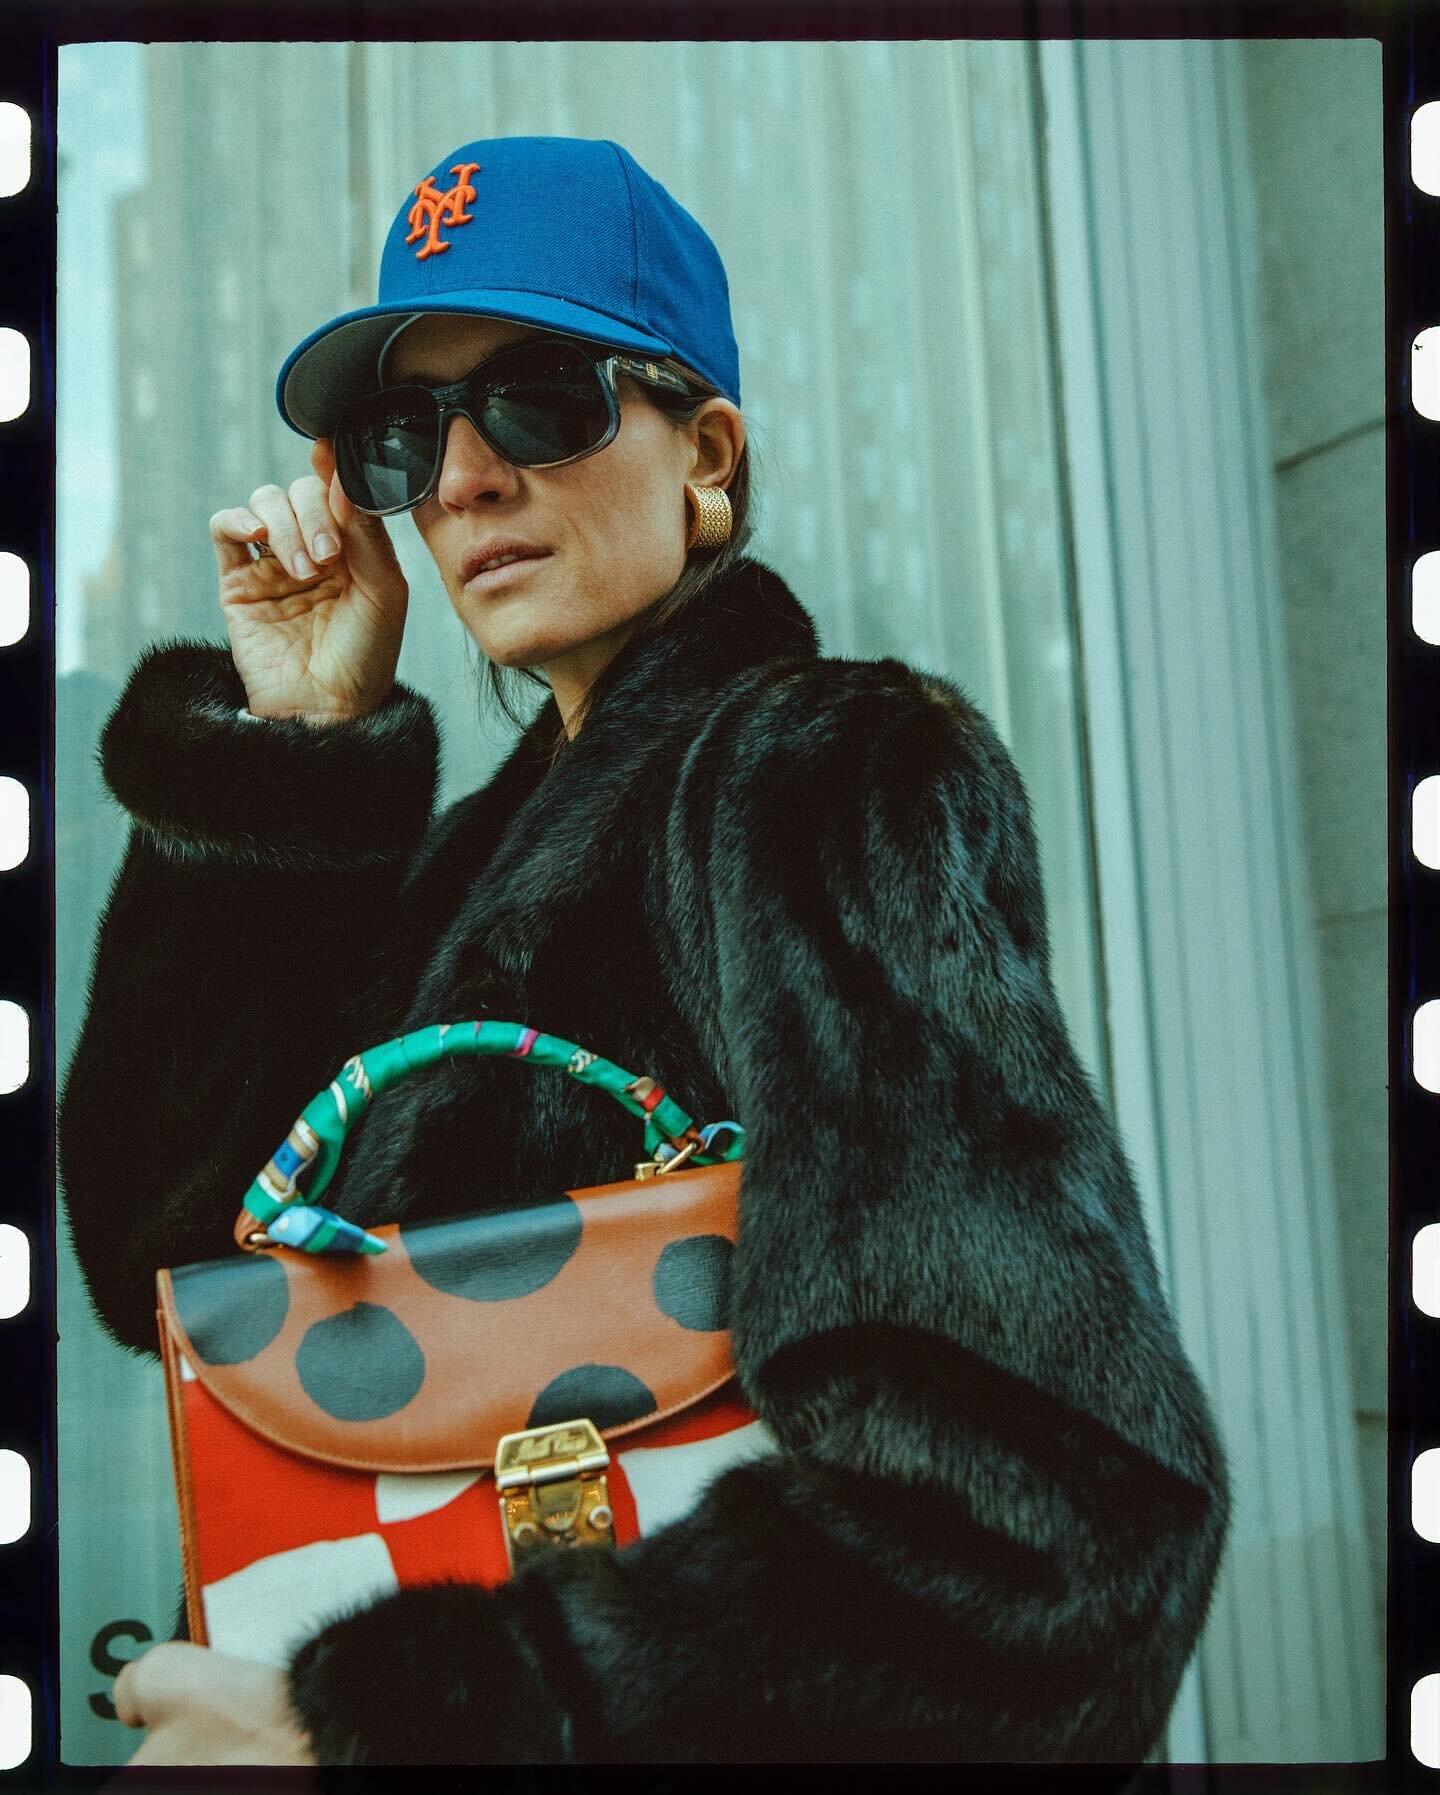 The F.E. Castleberry vintage mink fur coat&hellip;one of a small selection of vintage fur coats available in the TriBeCa shop. Paired with vintage Pucci sunglasses, Mark Cross bag, vintage Celine earrings, and Mets ball cap. GO METS!